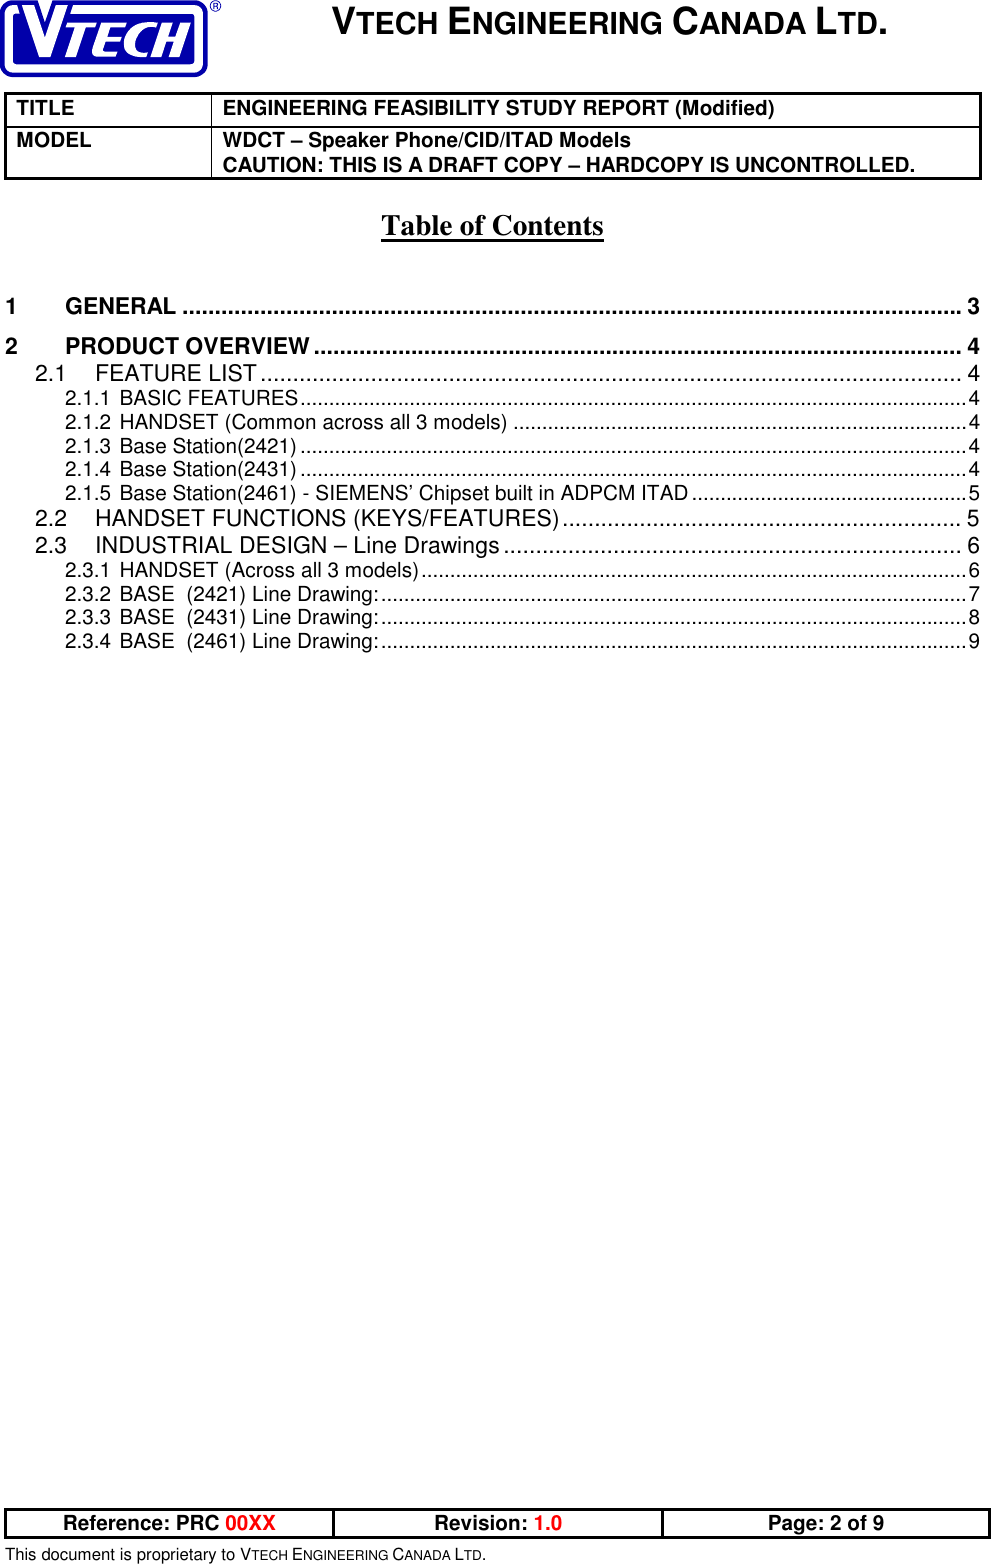 VTECH ENGINEERING CANADA LTD.TITLE ENGINEERING FEASIBILITY STUDY REPORT (Modified)MODEL WDCT – Speaker Phone/CID/ITAD ModelsCAUTION: THIS IS A DRAFT COPY – HARDCOPY IS UNCONTROLLED.Reference: PRC 00XX Revision: 1.0 Page: 2 of 9This document is proprietary to VTECH ENGINEERING CANADA LTD.Table of Contents1 GENERAL ........................................................................................................................32 PRODUCT OVERVIEW.................................................................................................... 42.1 FEATURE LIST............................................................................................................ 42.1.1 BASIC FEATURES....................................................................................................................42.1.2 HANDSET (Common across all 3 models) ...............................................................................42.1.3 Base Station(2421) ....................................................................................................................42.1.4 Base Station(2431) ....................................................................................................................42.1.5 Base Station(2461) - SIEMENS’ Chipset built in ADPCM ITAD................................................52.2 HANDSET FUNCTIONS (KEYS/FEATURES).............................................................. 52.3 INDUSTRIAL DESIGN – Line Drawings....................................................................... 62.3.1 HANDSET (Across all 3 models)...............................................................................................62.3.2 BASE  (2421) Line Drawing:......................................................................................................72.3.3 BASE  (2431) Line Drawing:......................................................................................................82.3.4 BASE  (2461) Line Drawing:......................................................................................................9